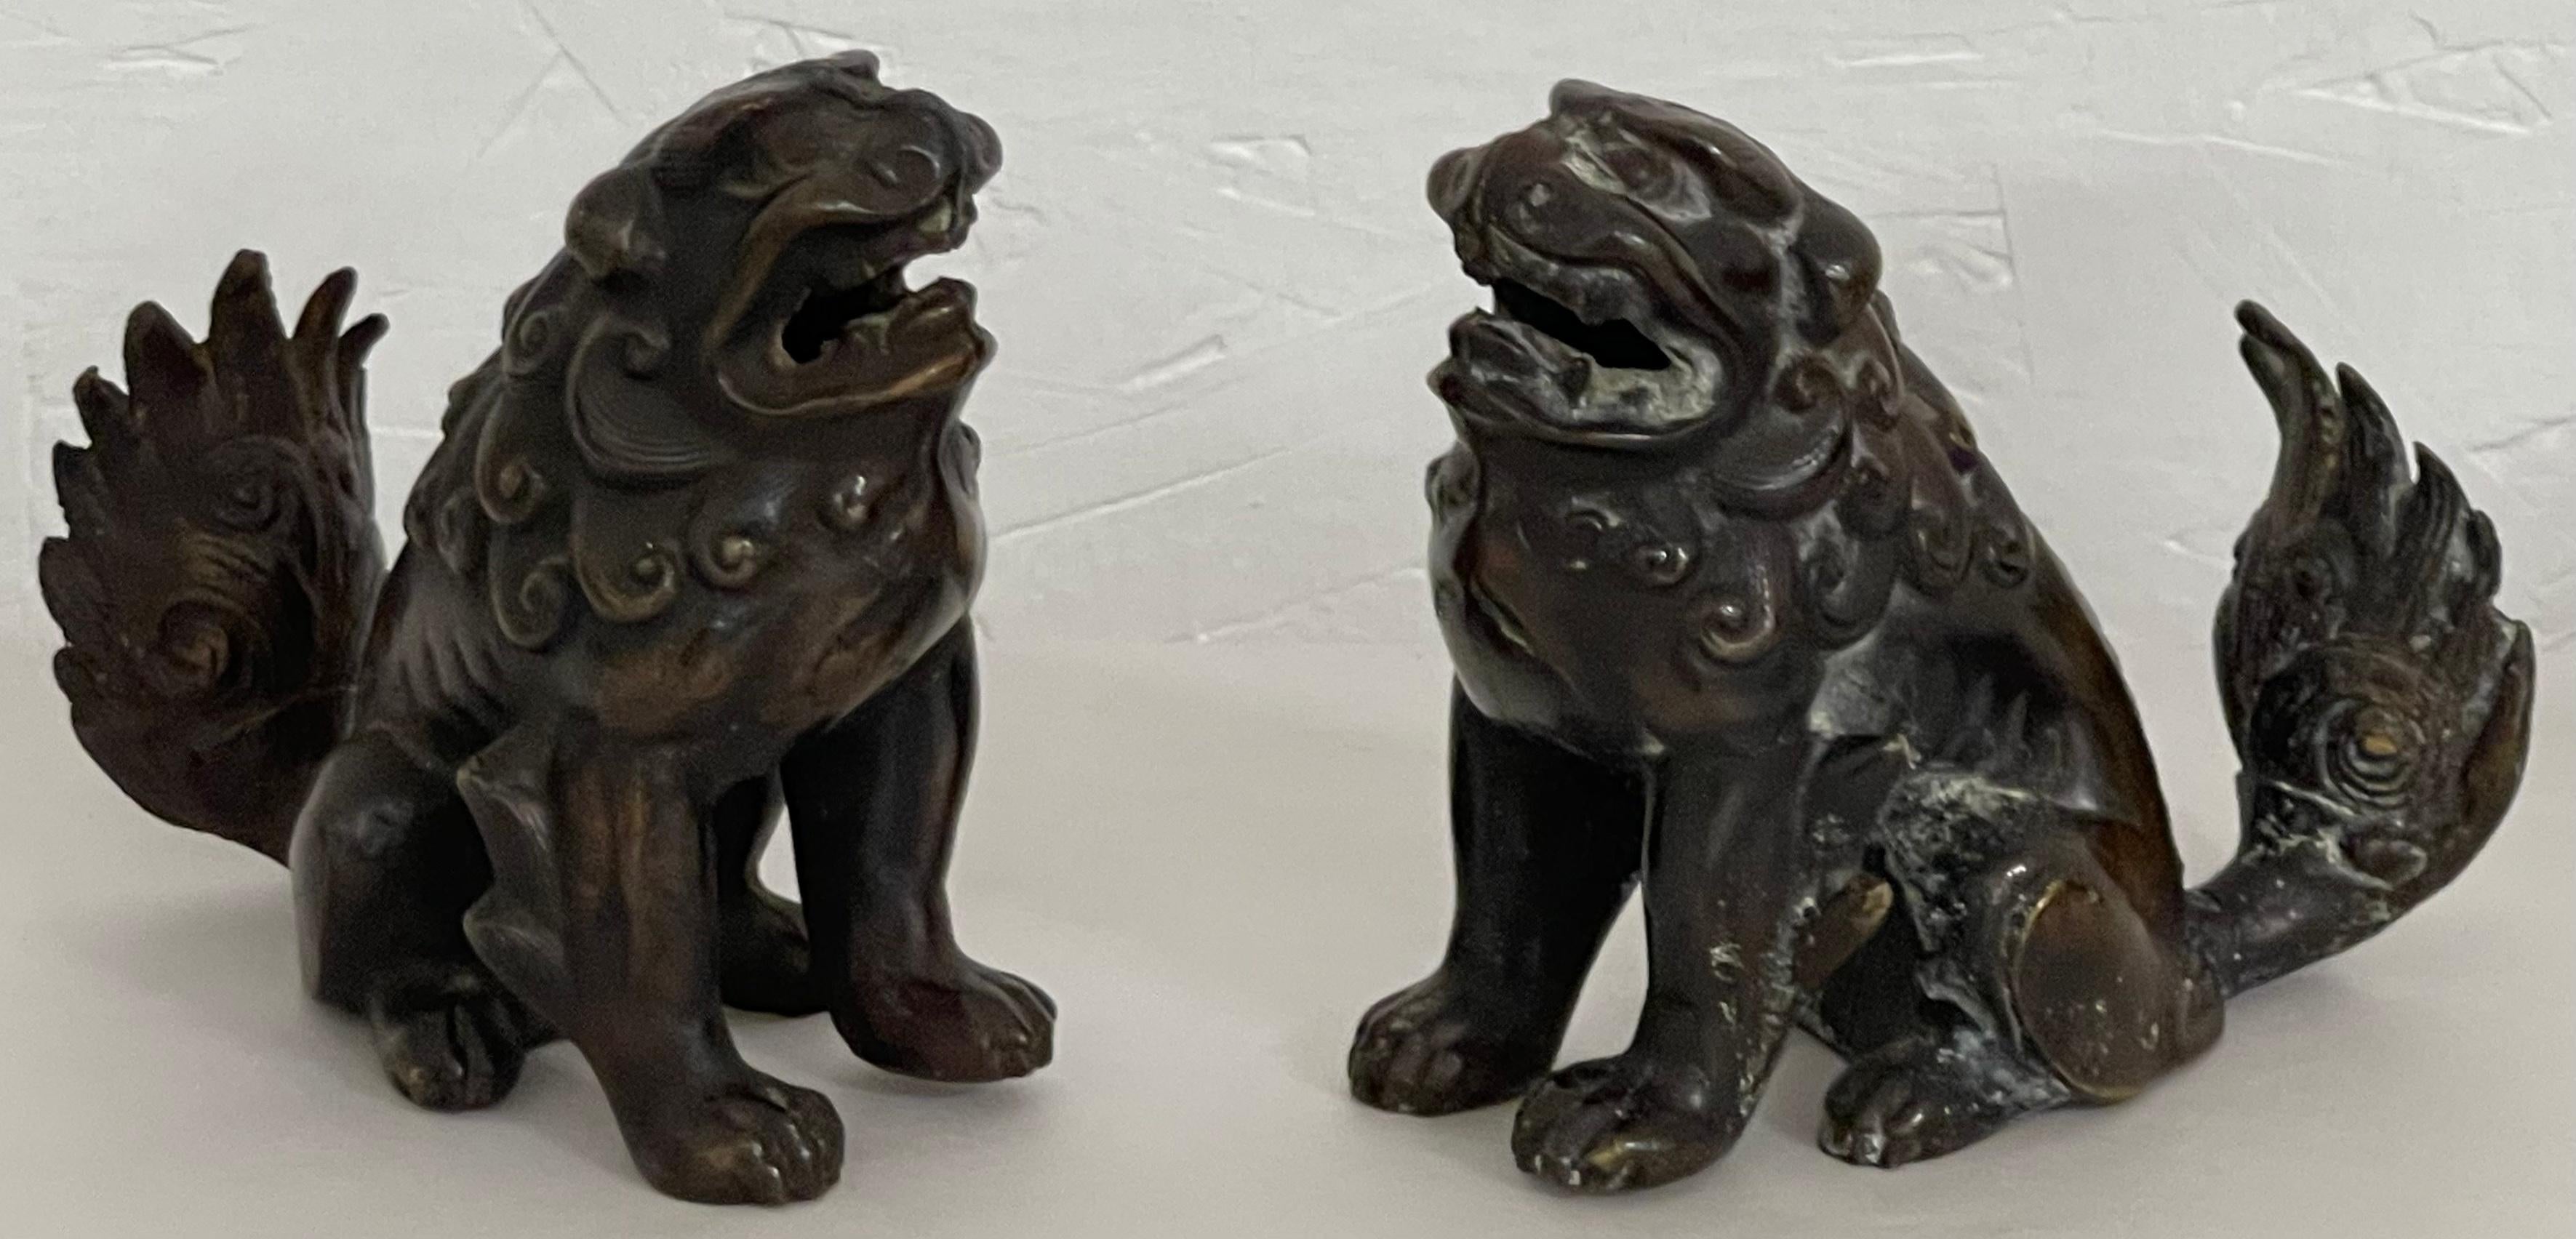 20th Century Early 20th-C. Asian Bronze Food Dogs or Lions Figurines, Pair For Sale